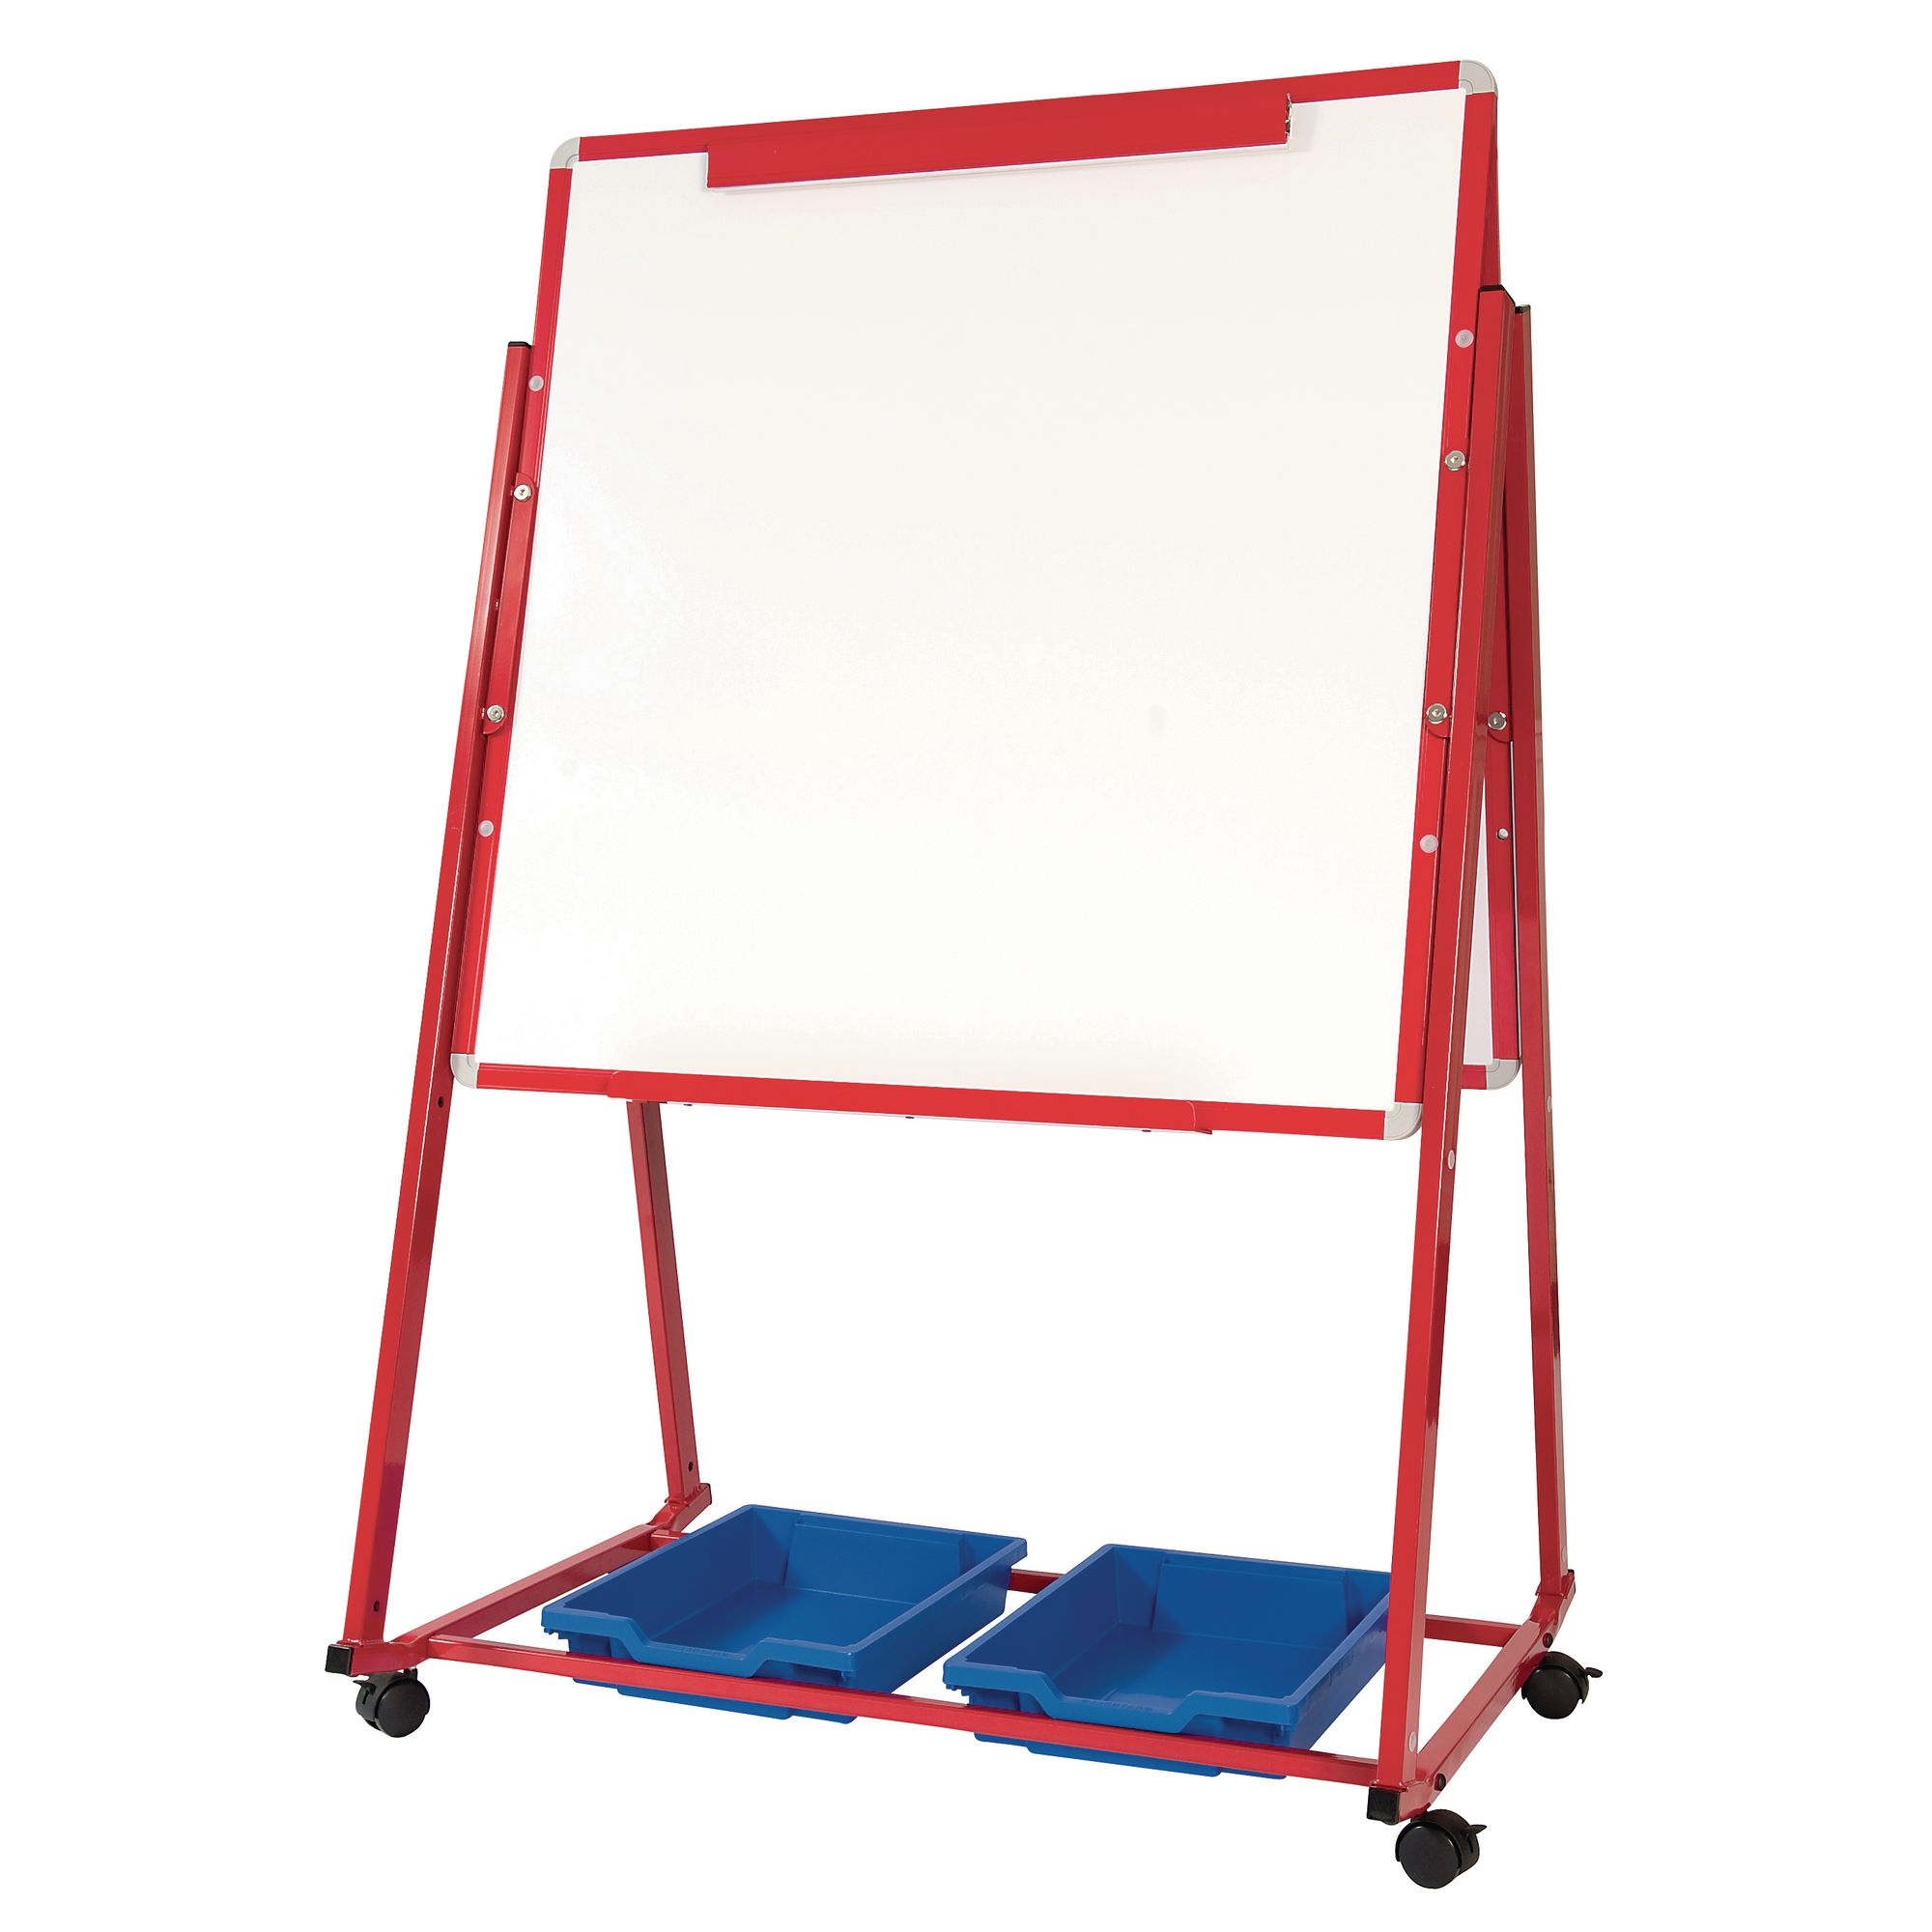 Double Sided Mobile Magnetic Display/Storage - Red